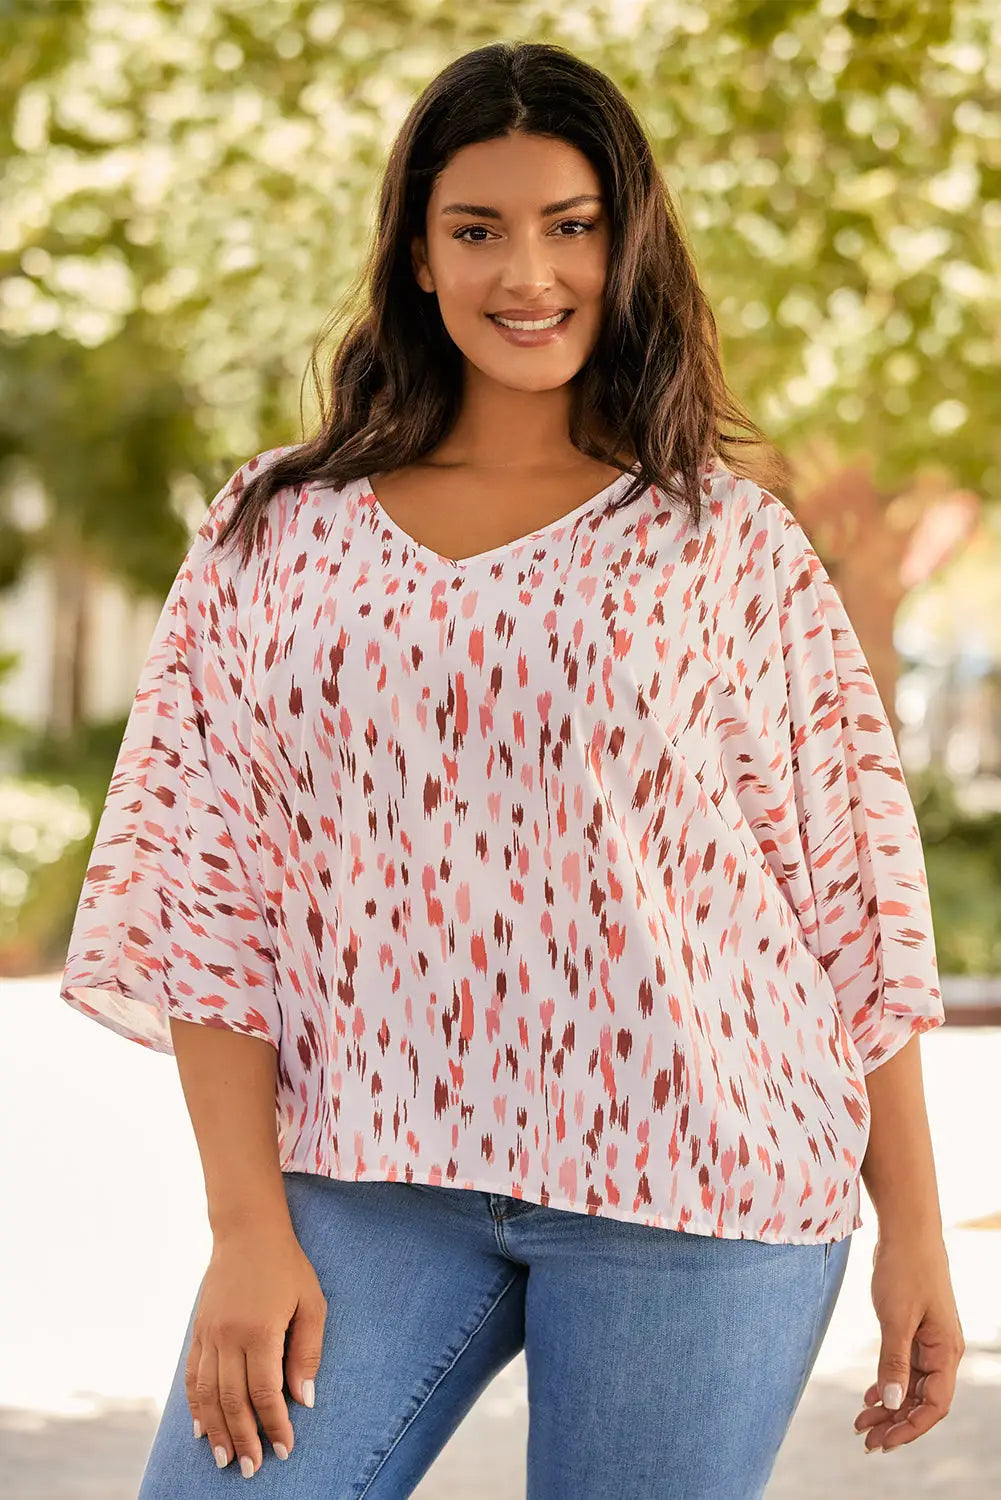 Pink printed 3/4 dolman sleeve plus size blouse - 1x / 100% polyester